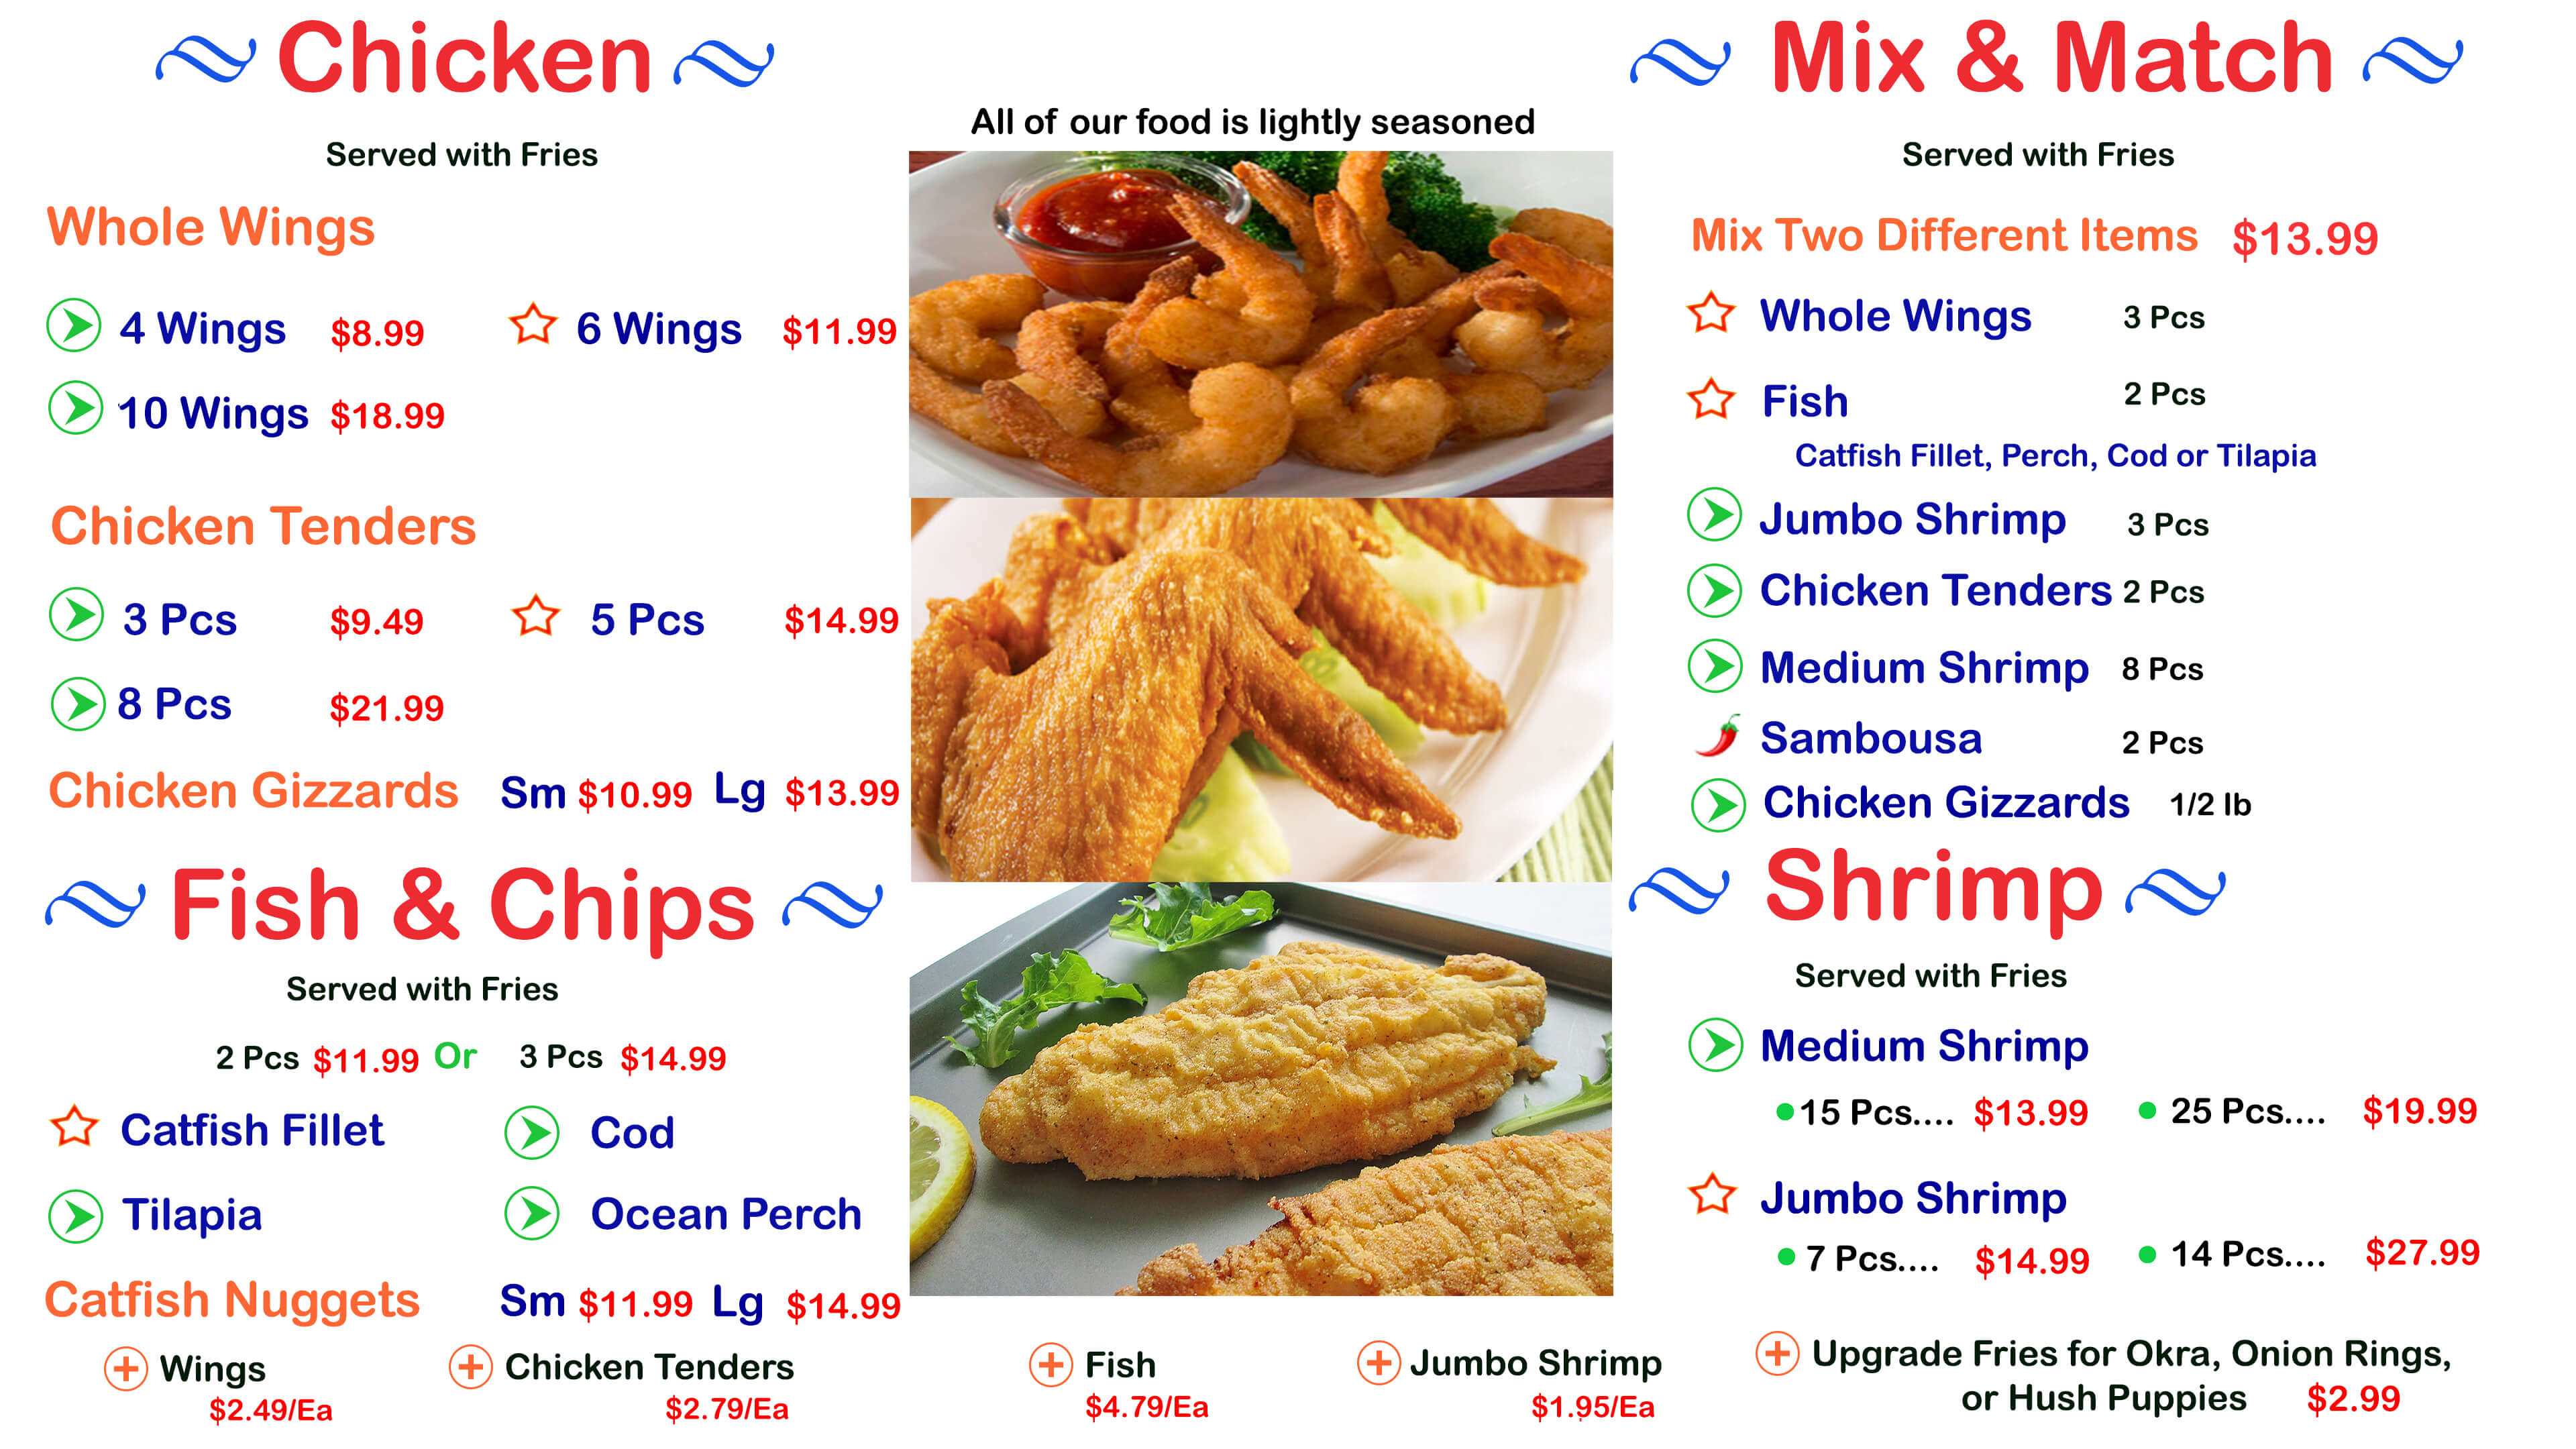 Hooks Fish And Chips Restaurant | 1611 Rice St N, St Paul, Mn 55114 | 7639 Jolly Ln, Brooklyn Park Mn